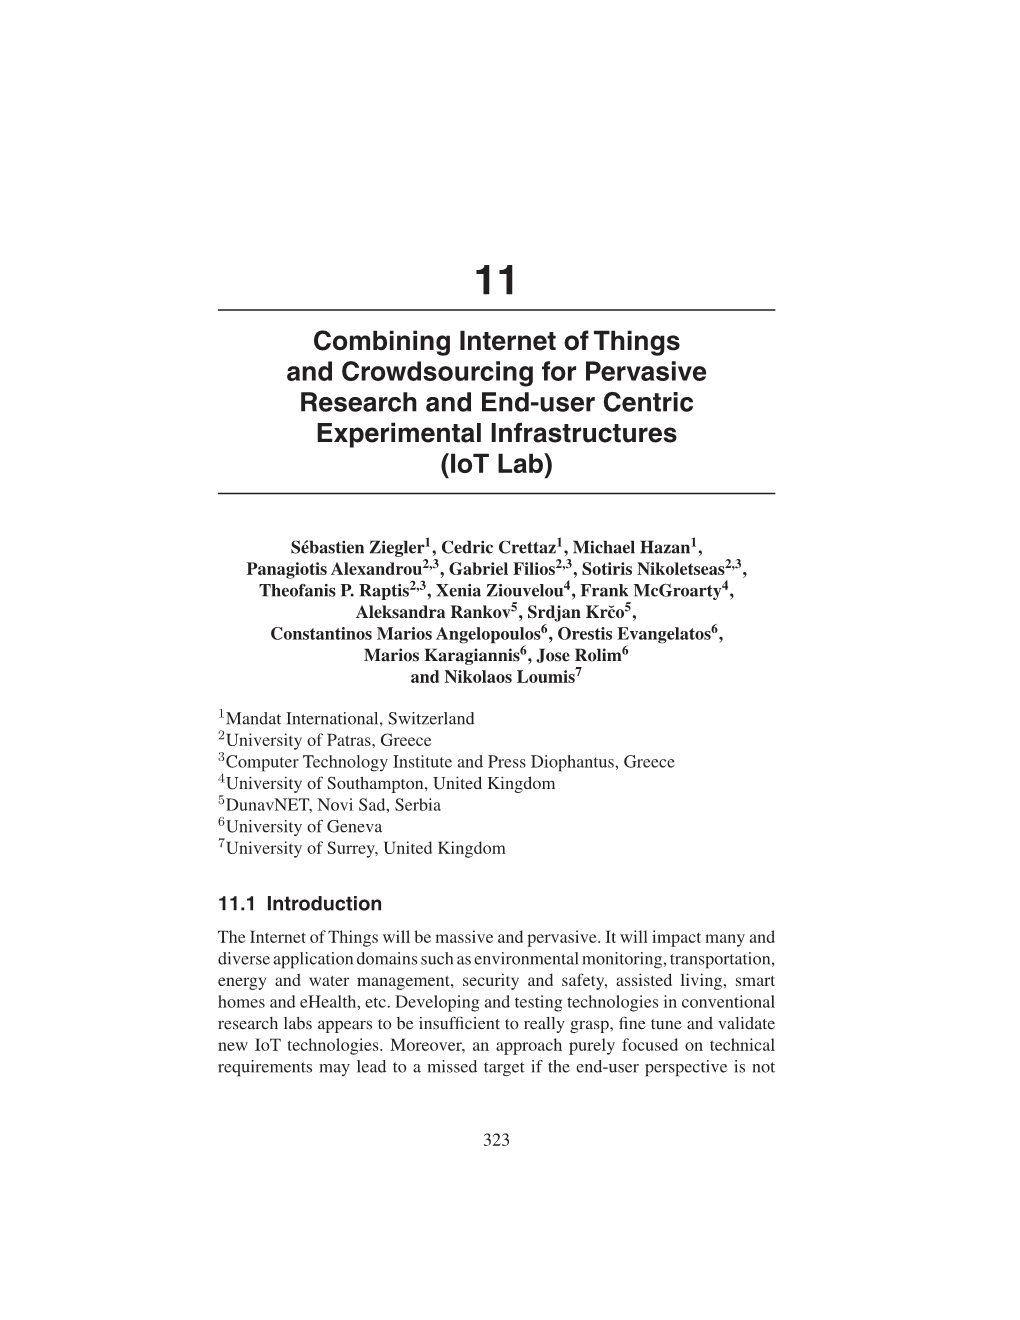 Combining Internet of Things and Crowdsourcing for Pervasive Research and End-User Centric Experimental Infrastructures (Iot Lab)